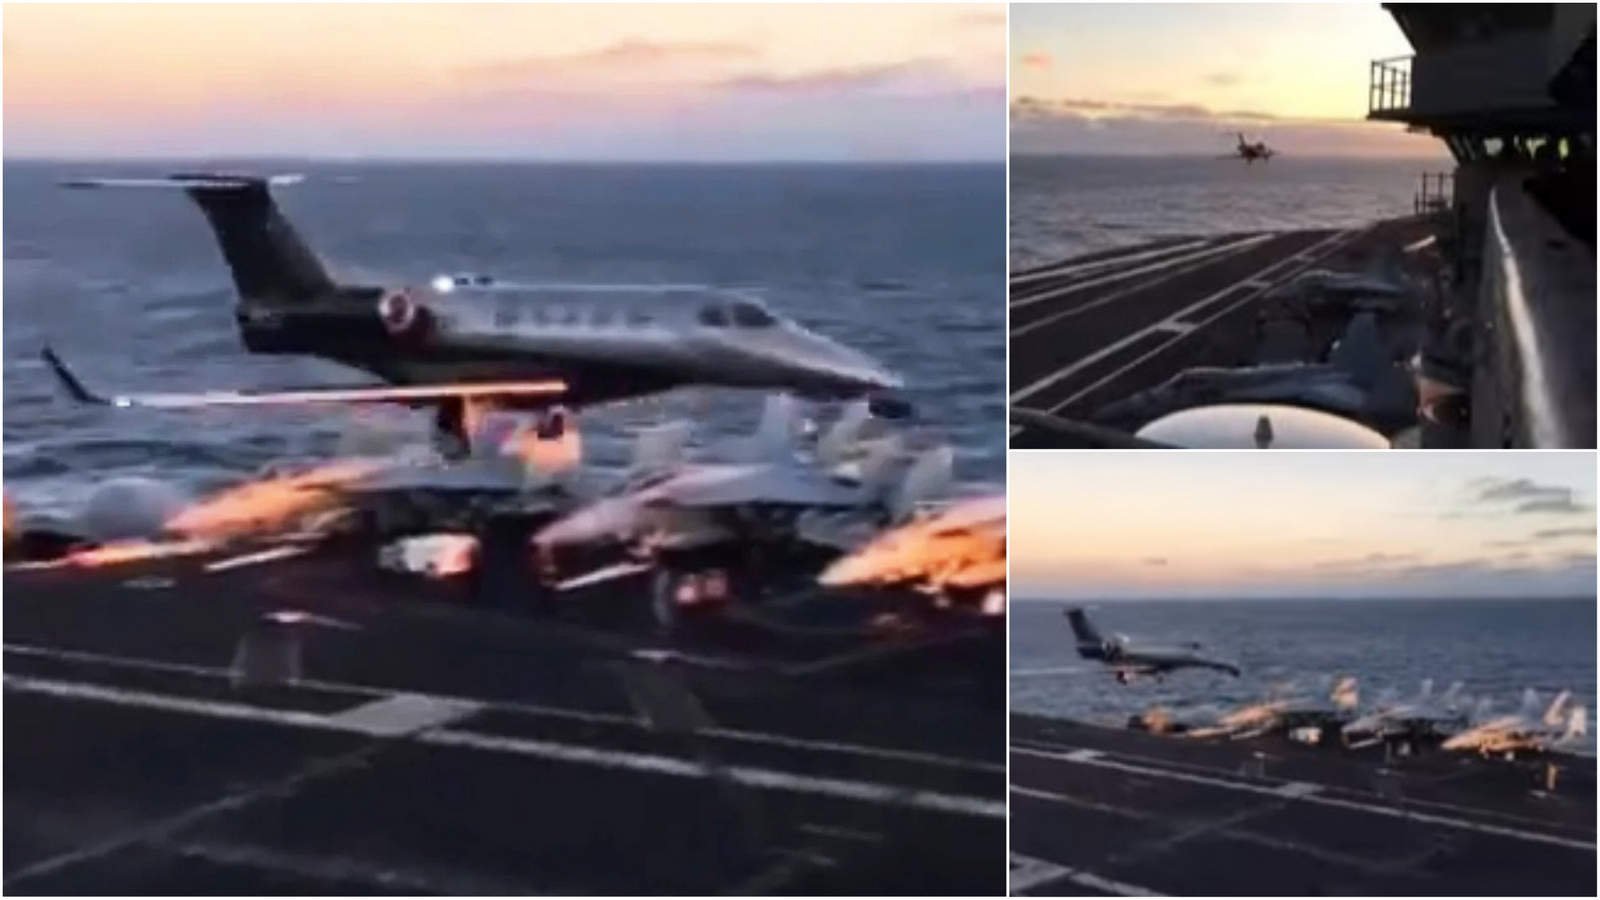 Tom Cruise dislikes CGI so much that the makers of Top Gun Maverick actually flew a private jet strikingly close to the landing deck of a $4.5B US aircraft carrier to get footage.